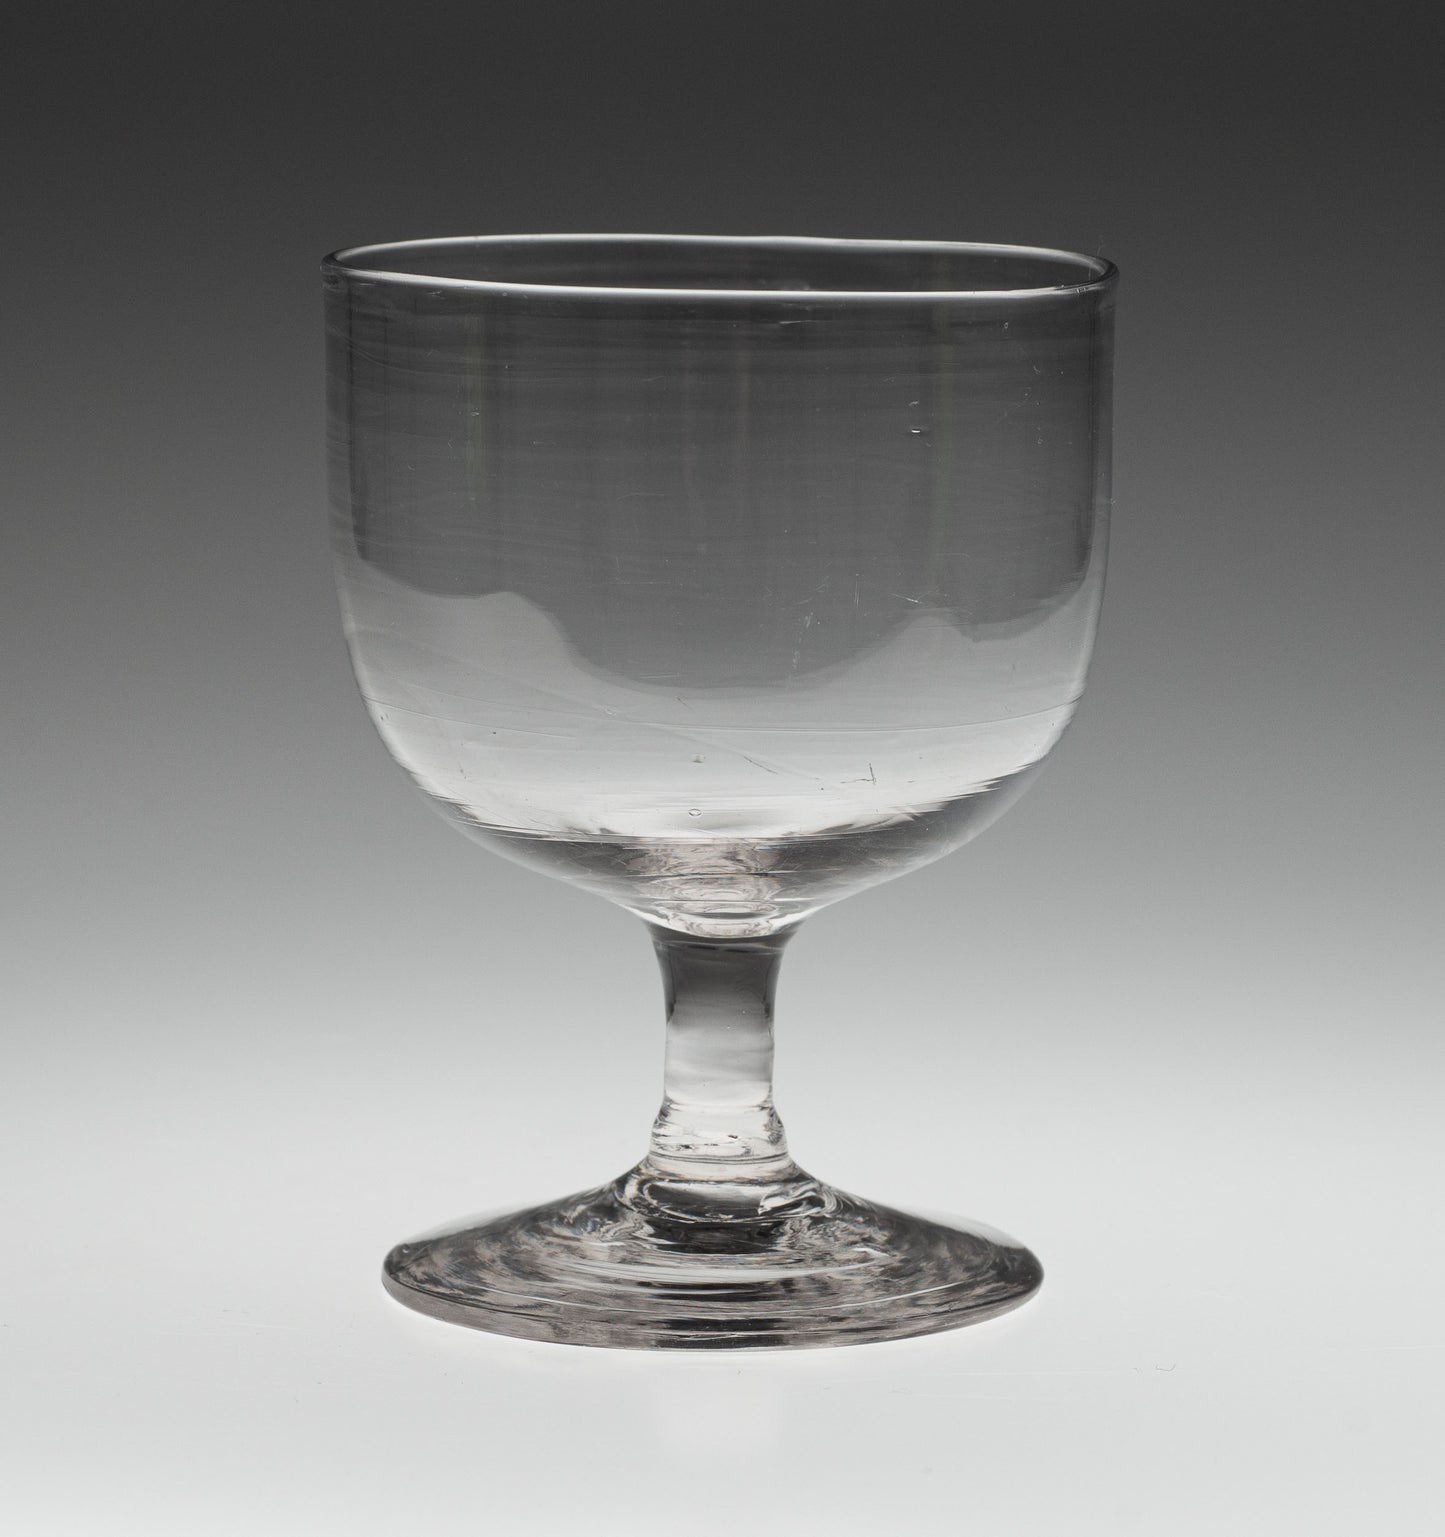 Early 19th Century Georgian Glass Rummer with Stem c1800 - English Lead Type (Code 2342)